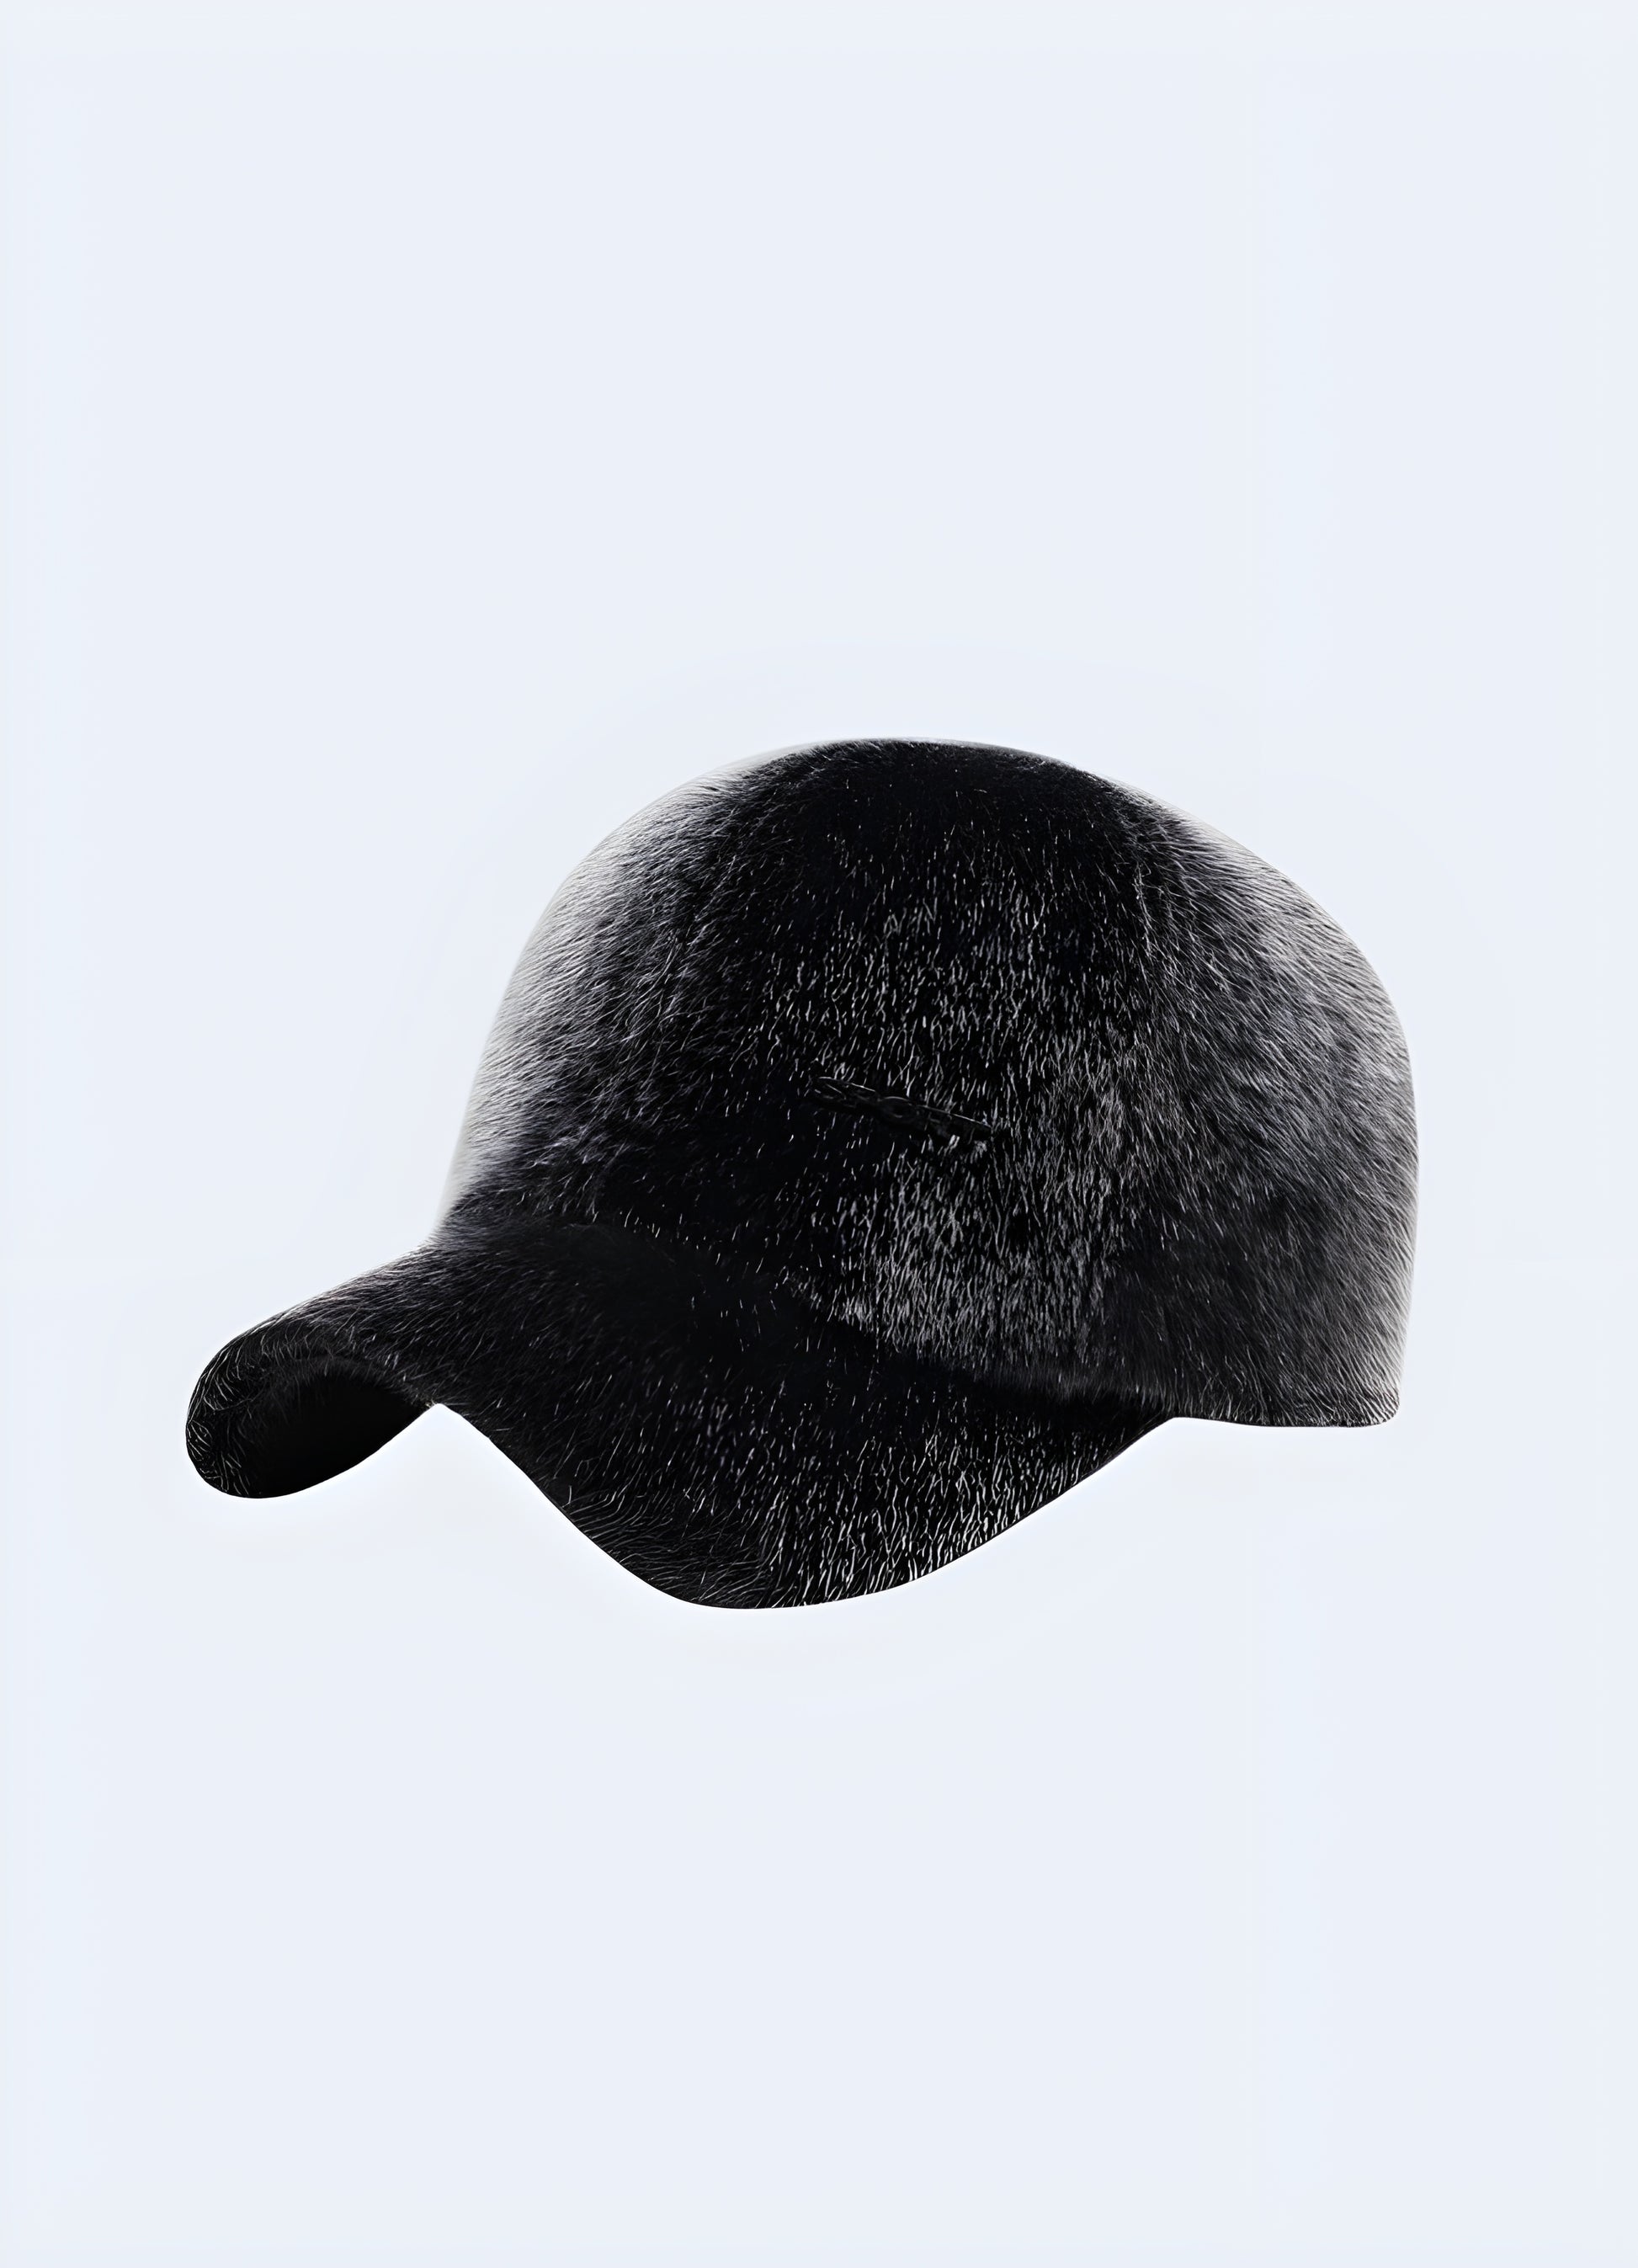 This fur baseball hat stands as a barrier, protecting your face confidently without giving up on style.